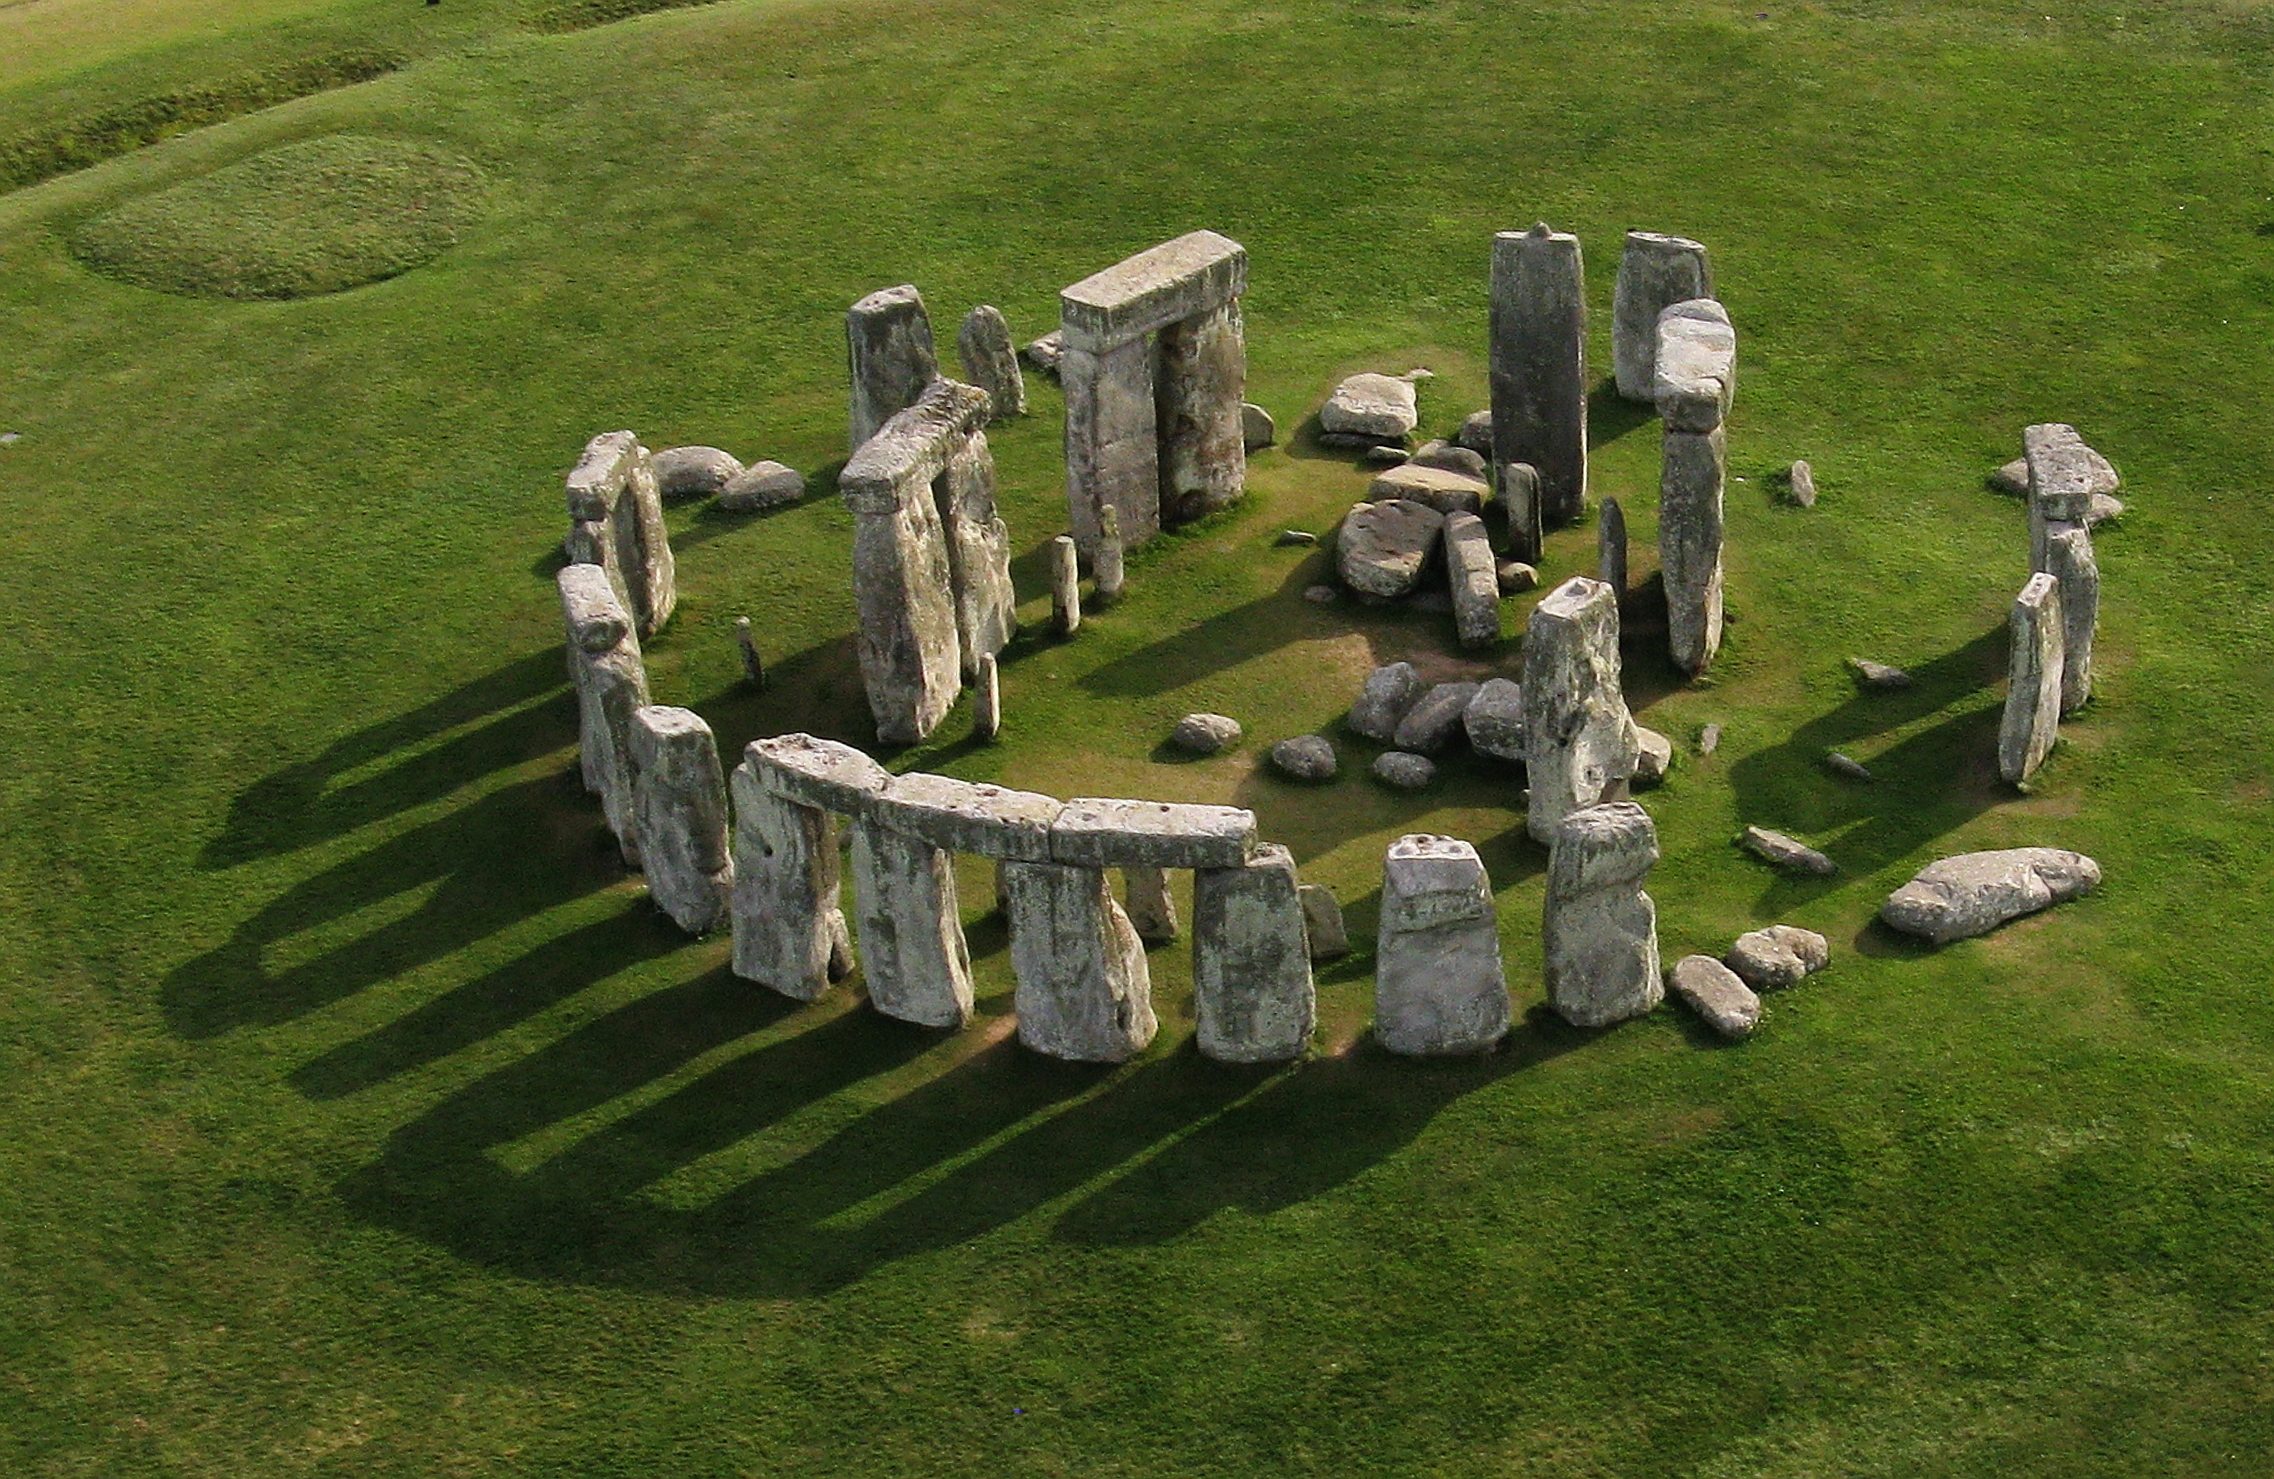 What You Should Know Before Visiting England Stonehenge